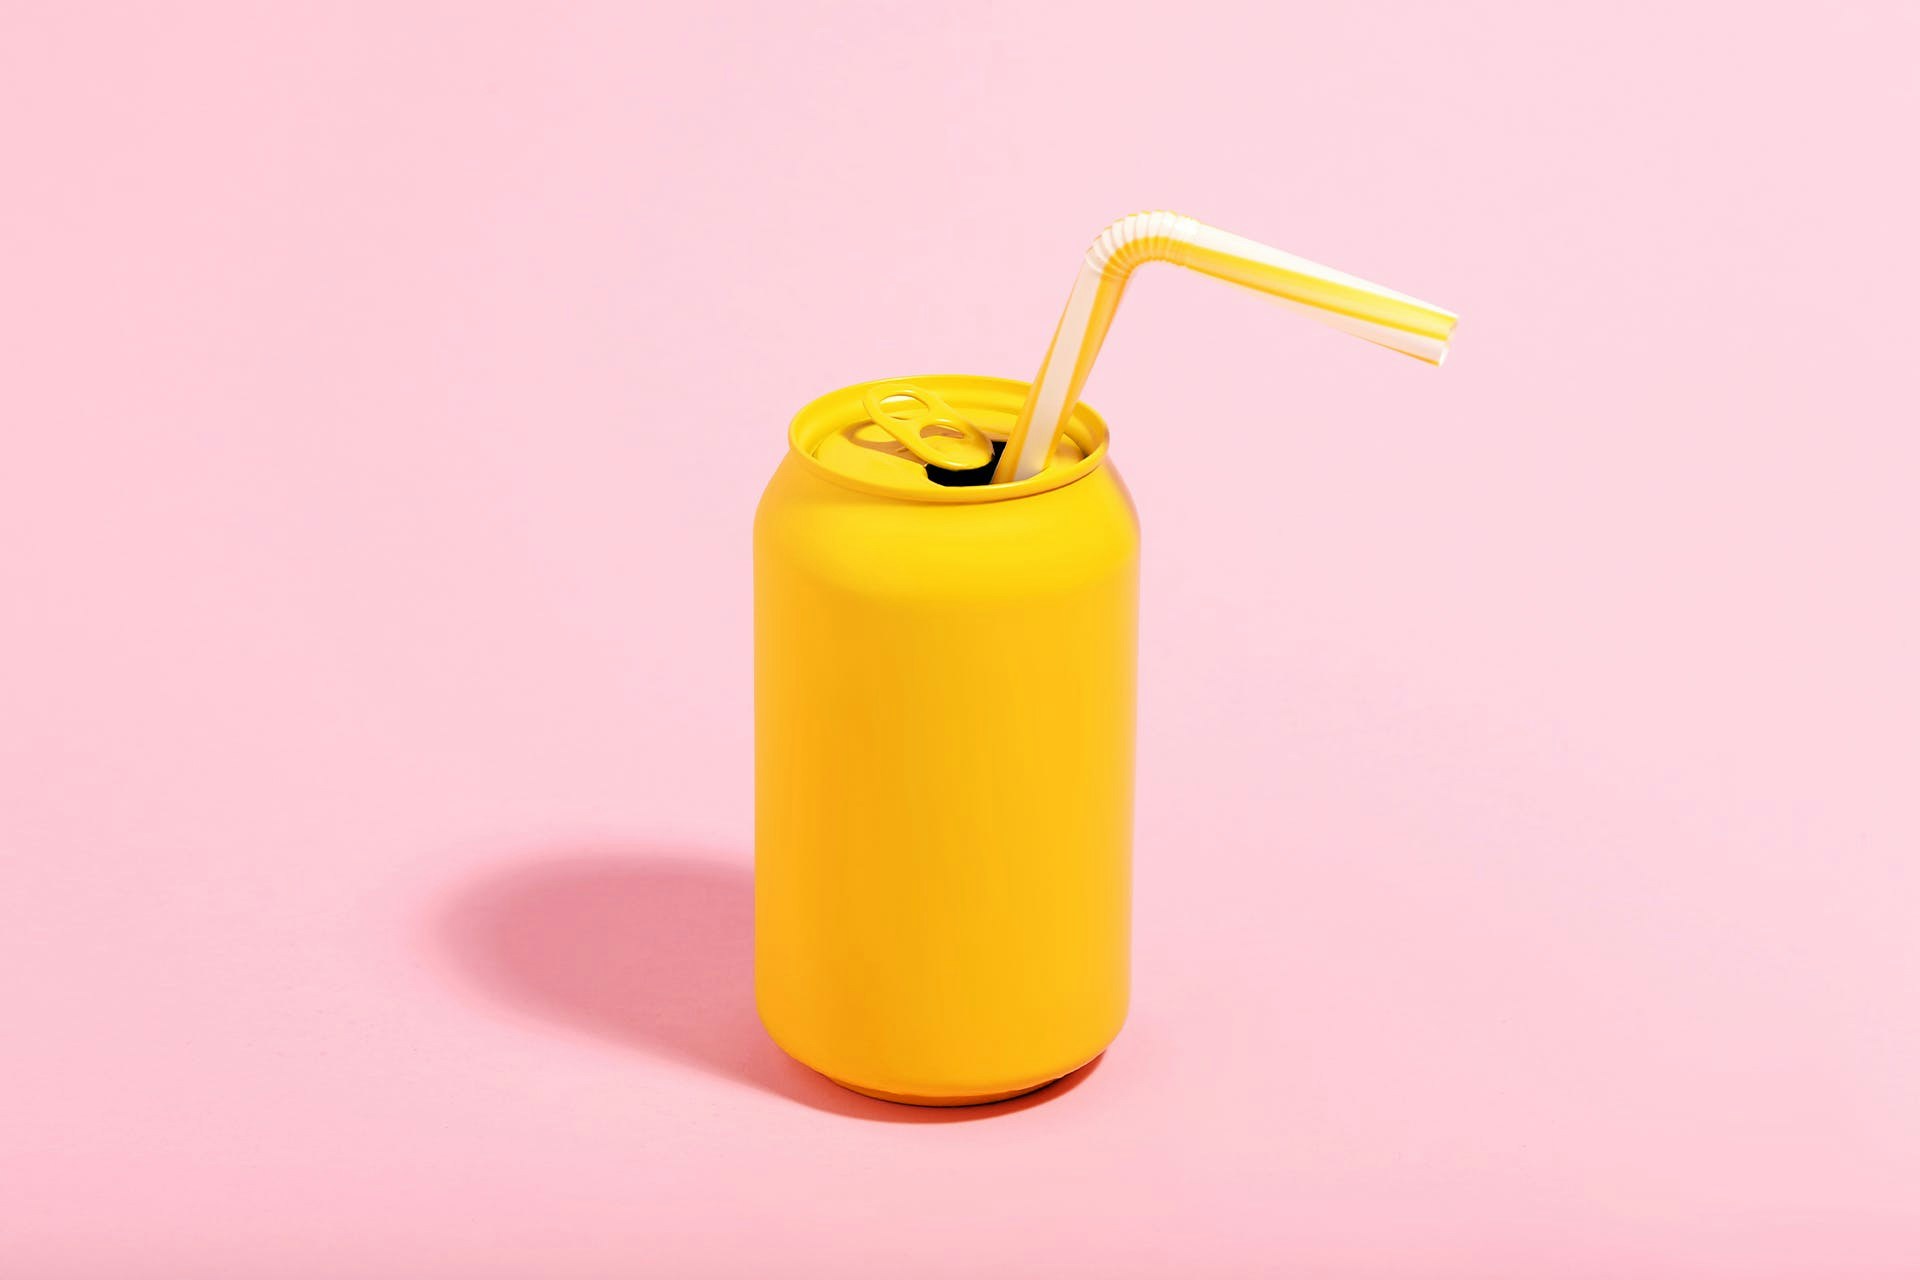 Bright yellow soda can with straw, on pink background. Blog post on definition of brand ambassadors